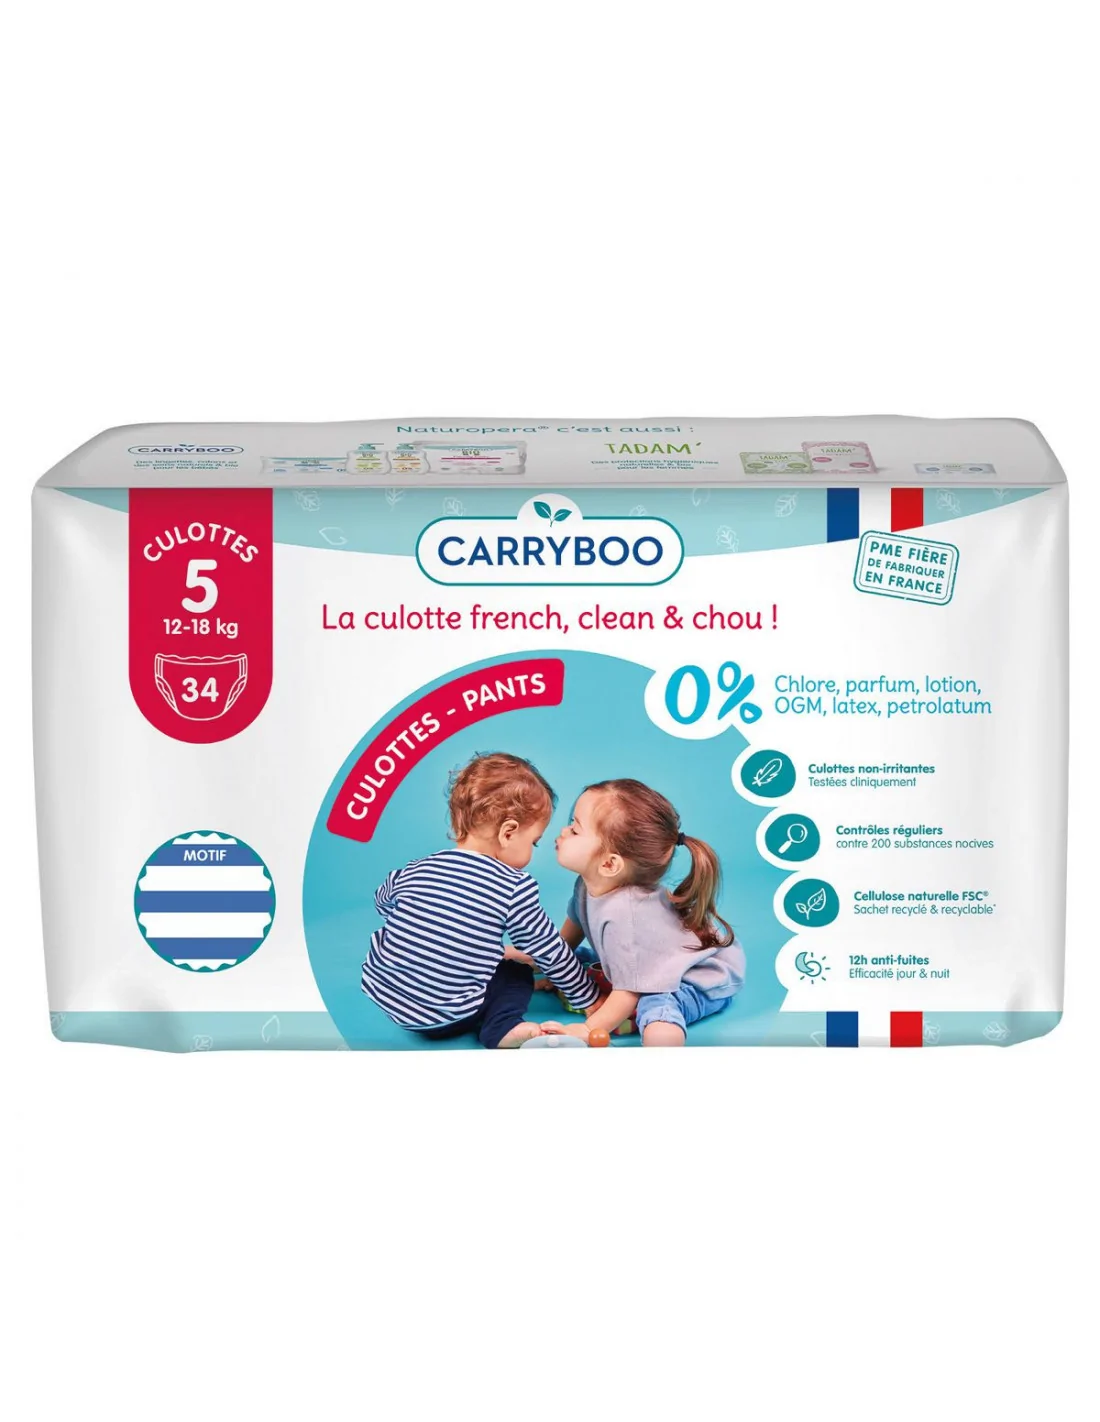 COUCHES JETABLES ÉCOLOGIQUES Tidoo 3 PACKS Taille 6 - 16/30 kg